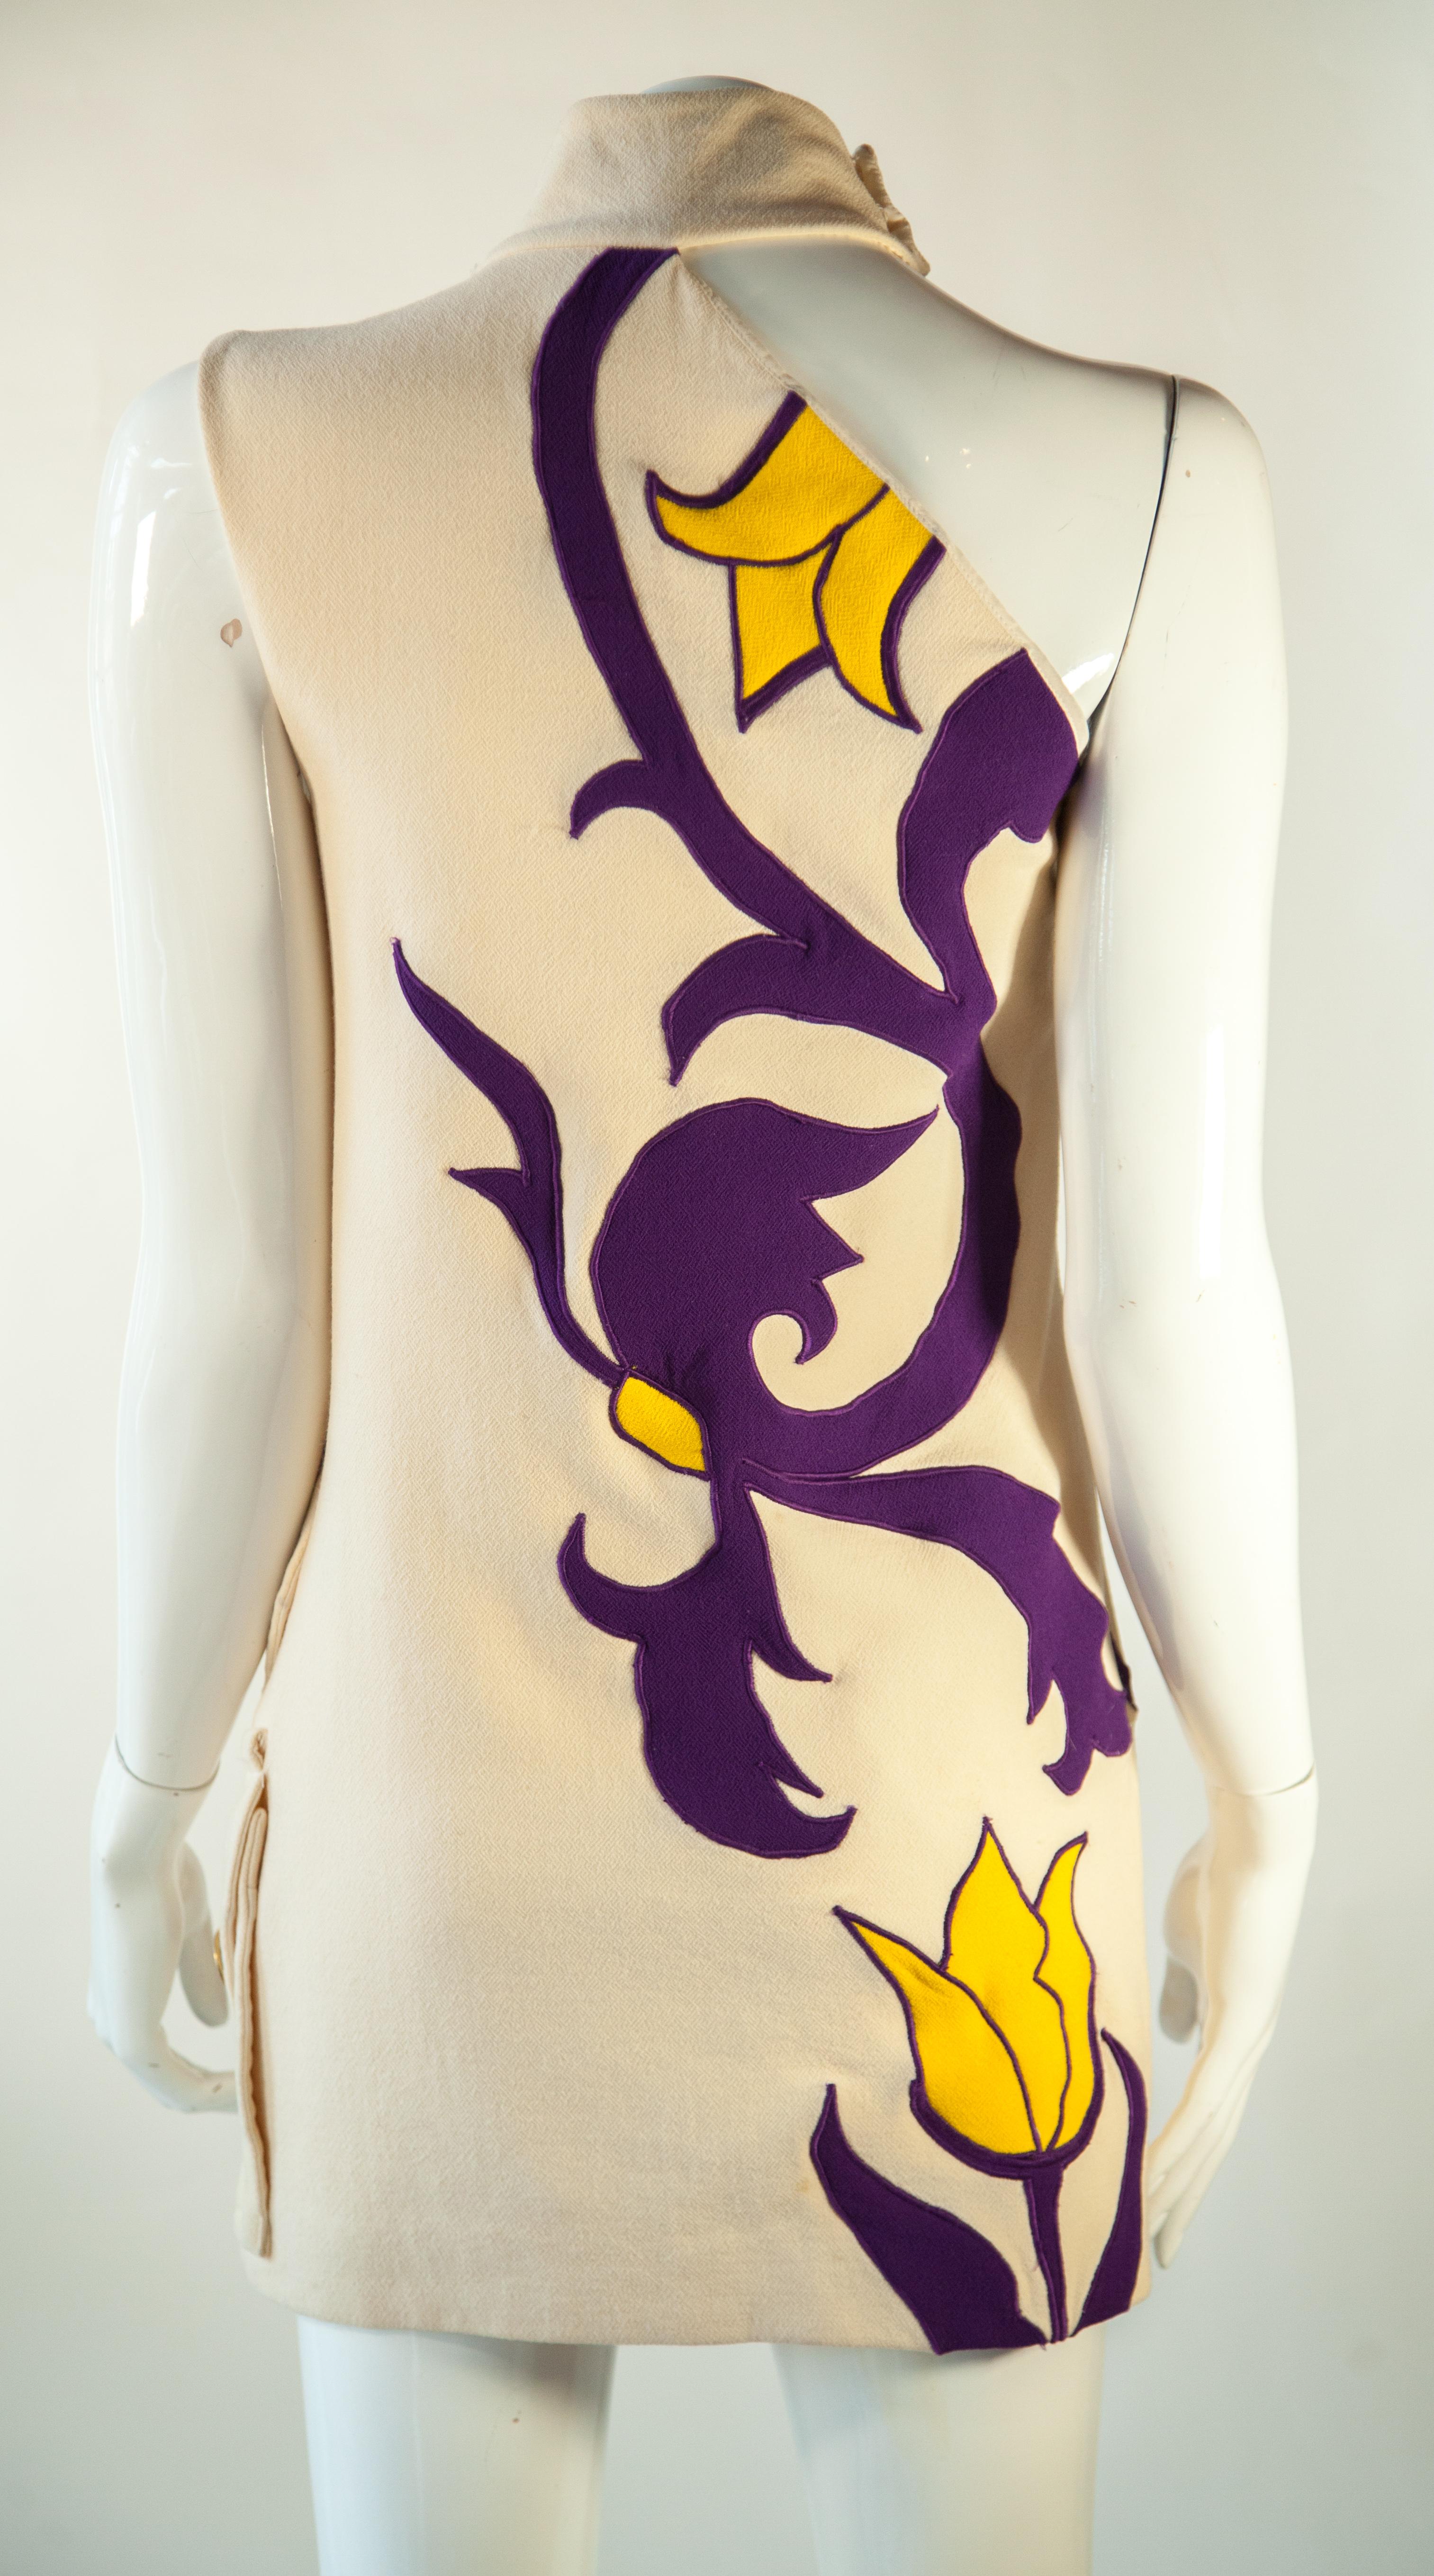 Versace, Baroque Tulip Dress with Gilded Medusa Buttons, 2011 In Excellent Condition For Sale In Kingston, NY